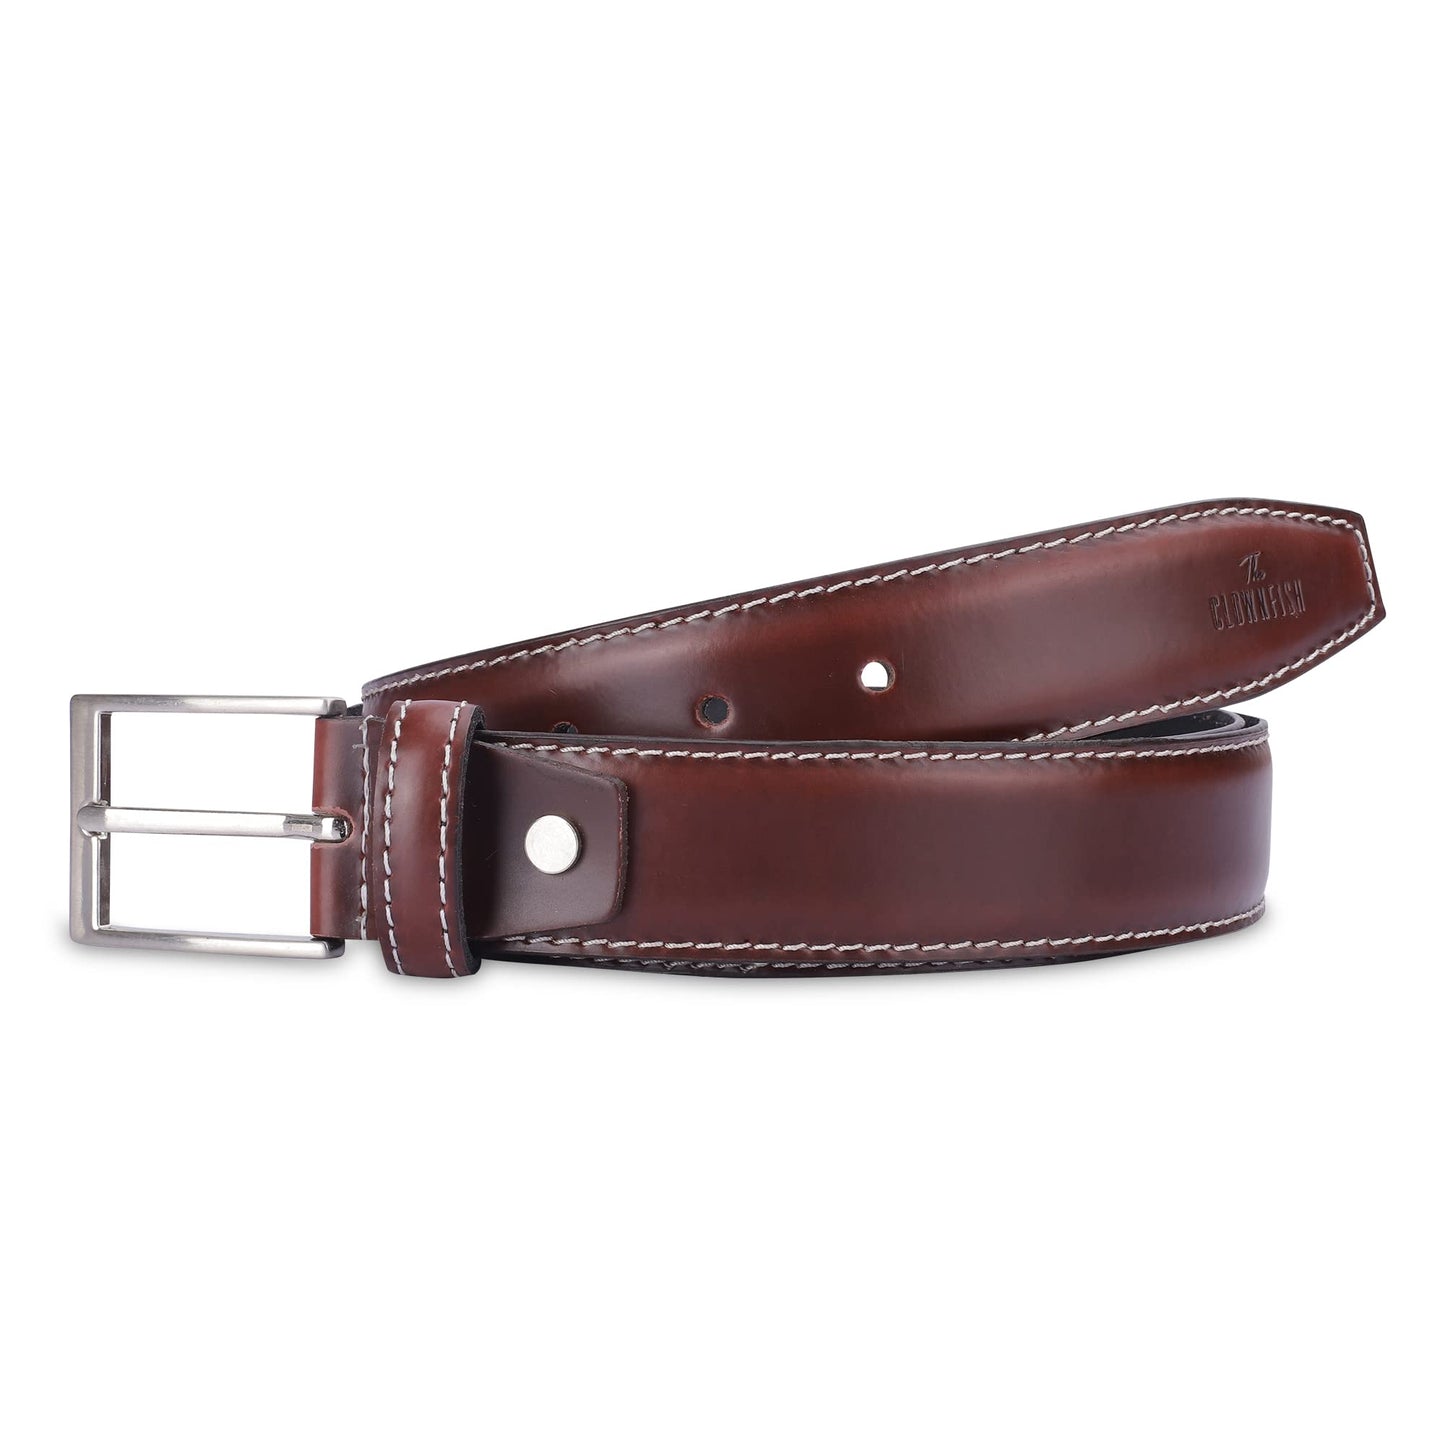 THE CLOWNFISH Men's Genuine Leather Belt - Maroon (Size-32 inches)